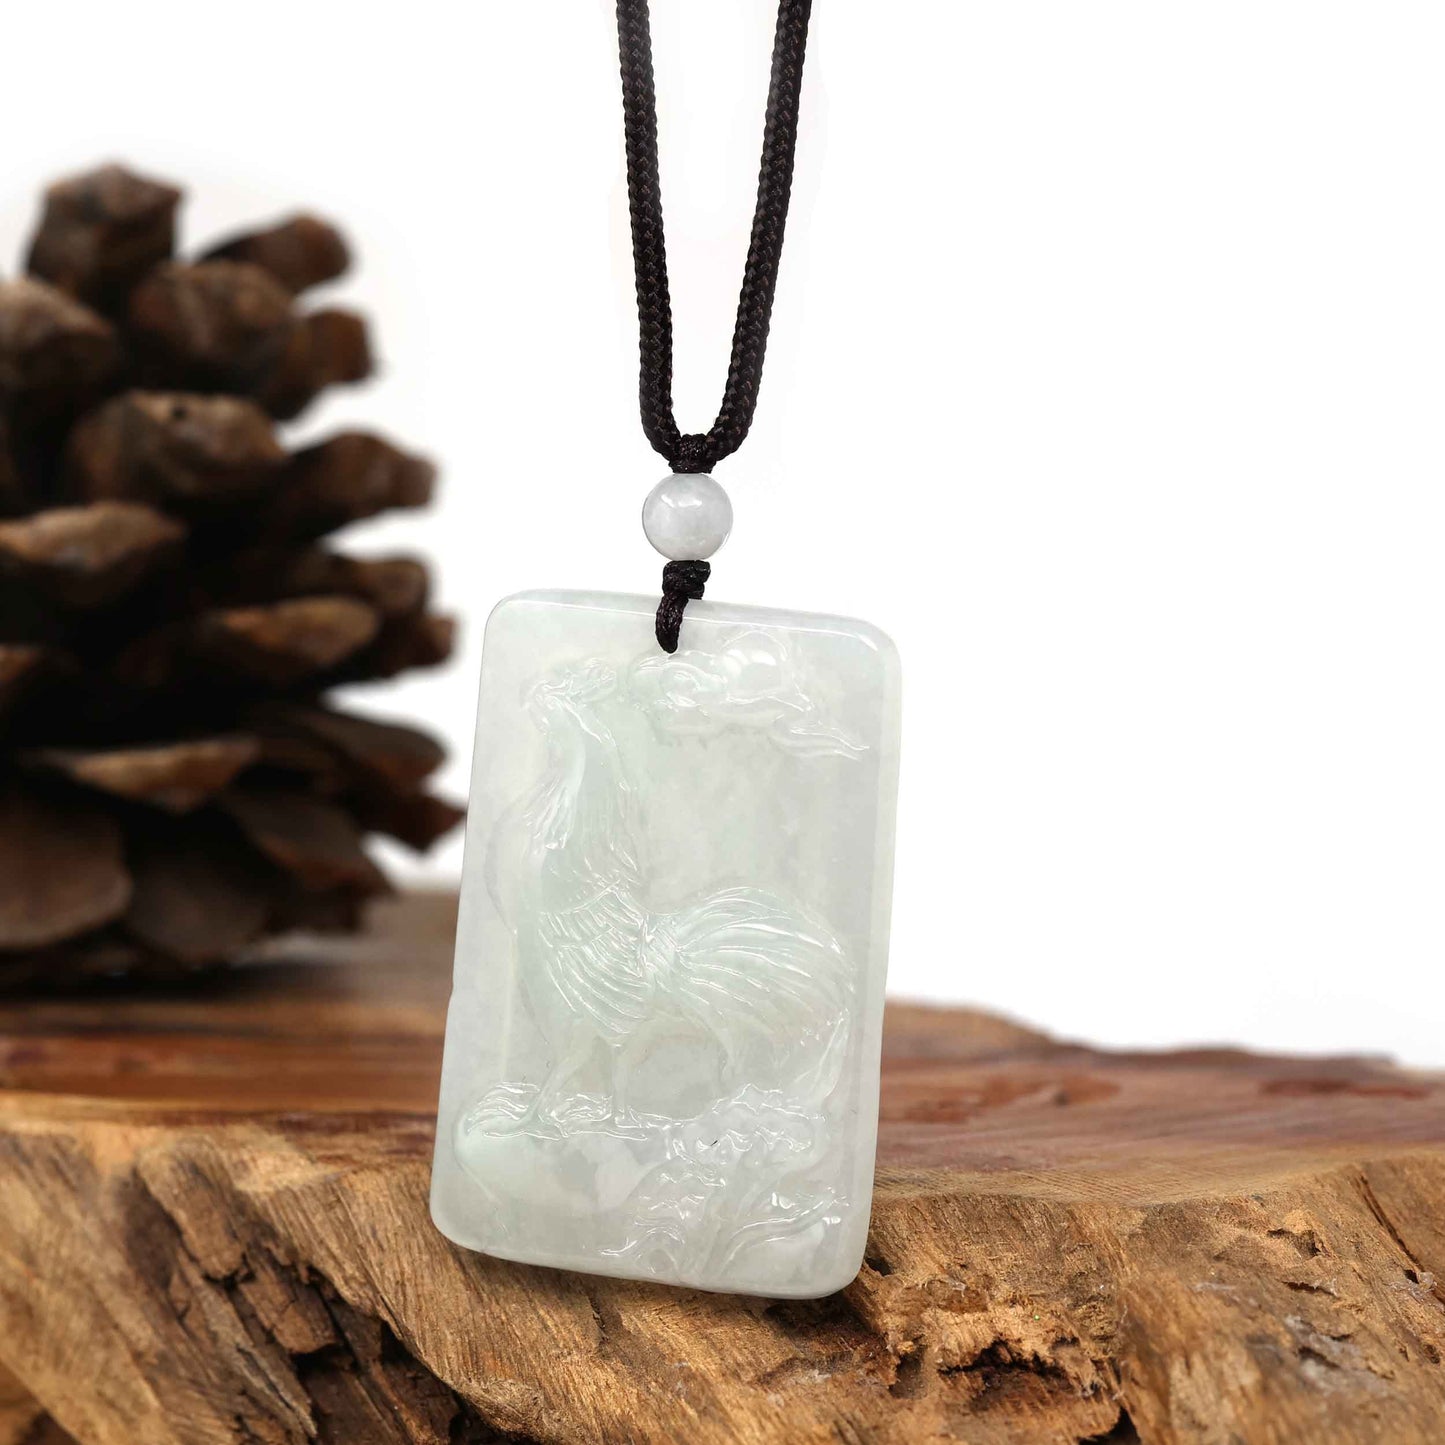 RealJade Co. Jade Carving Necklace Copy of Natural Honey Yellow Jadeite Jade "Rooster" Pendant Necklace For Men, Collectibles.